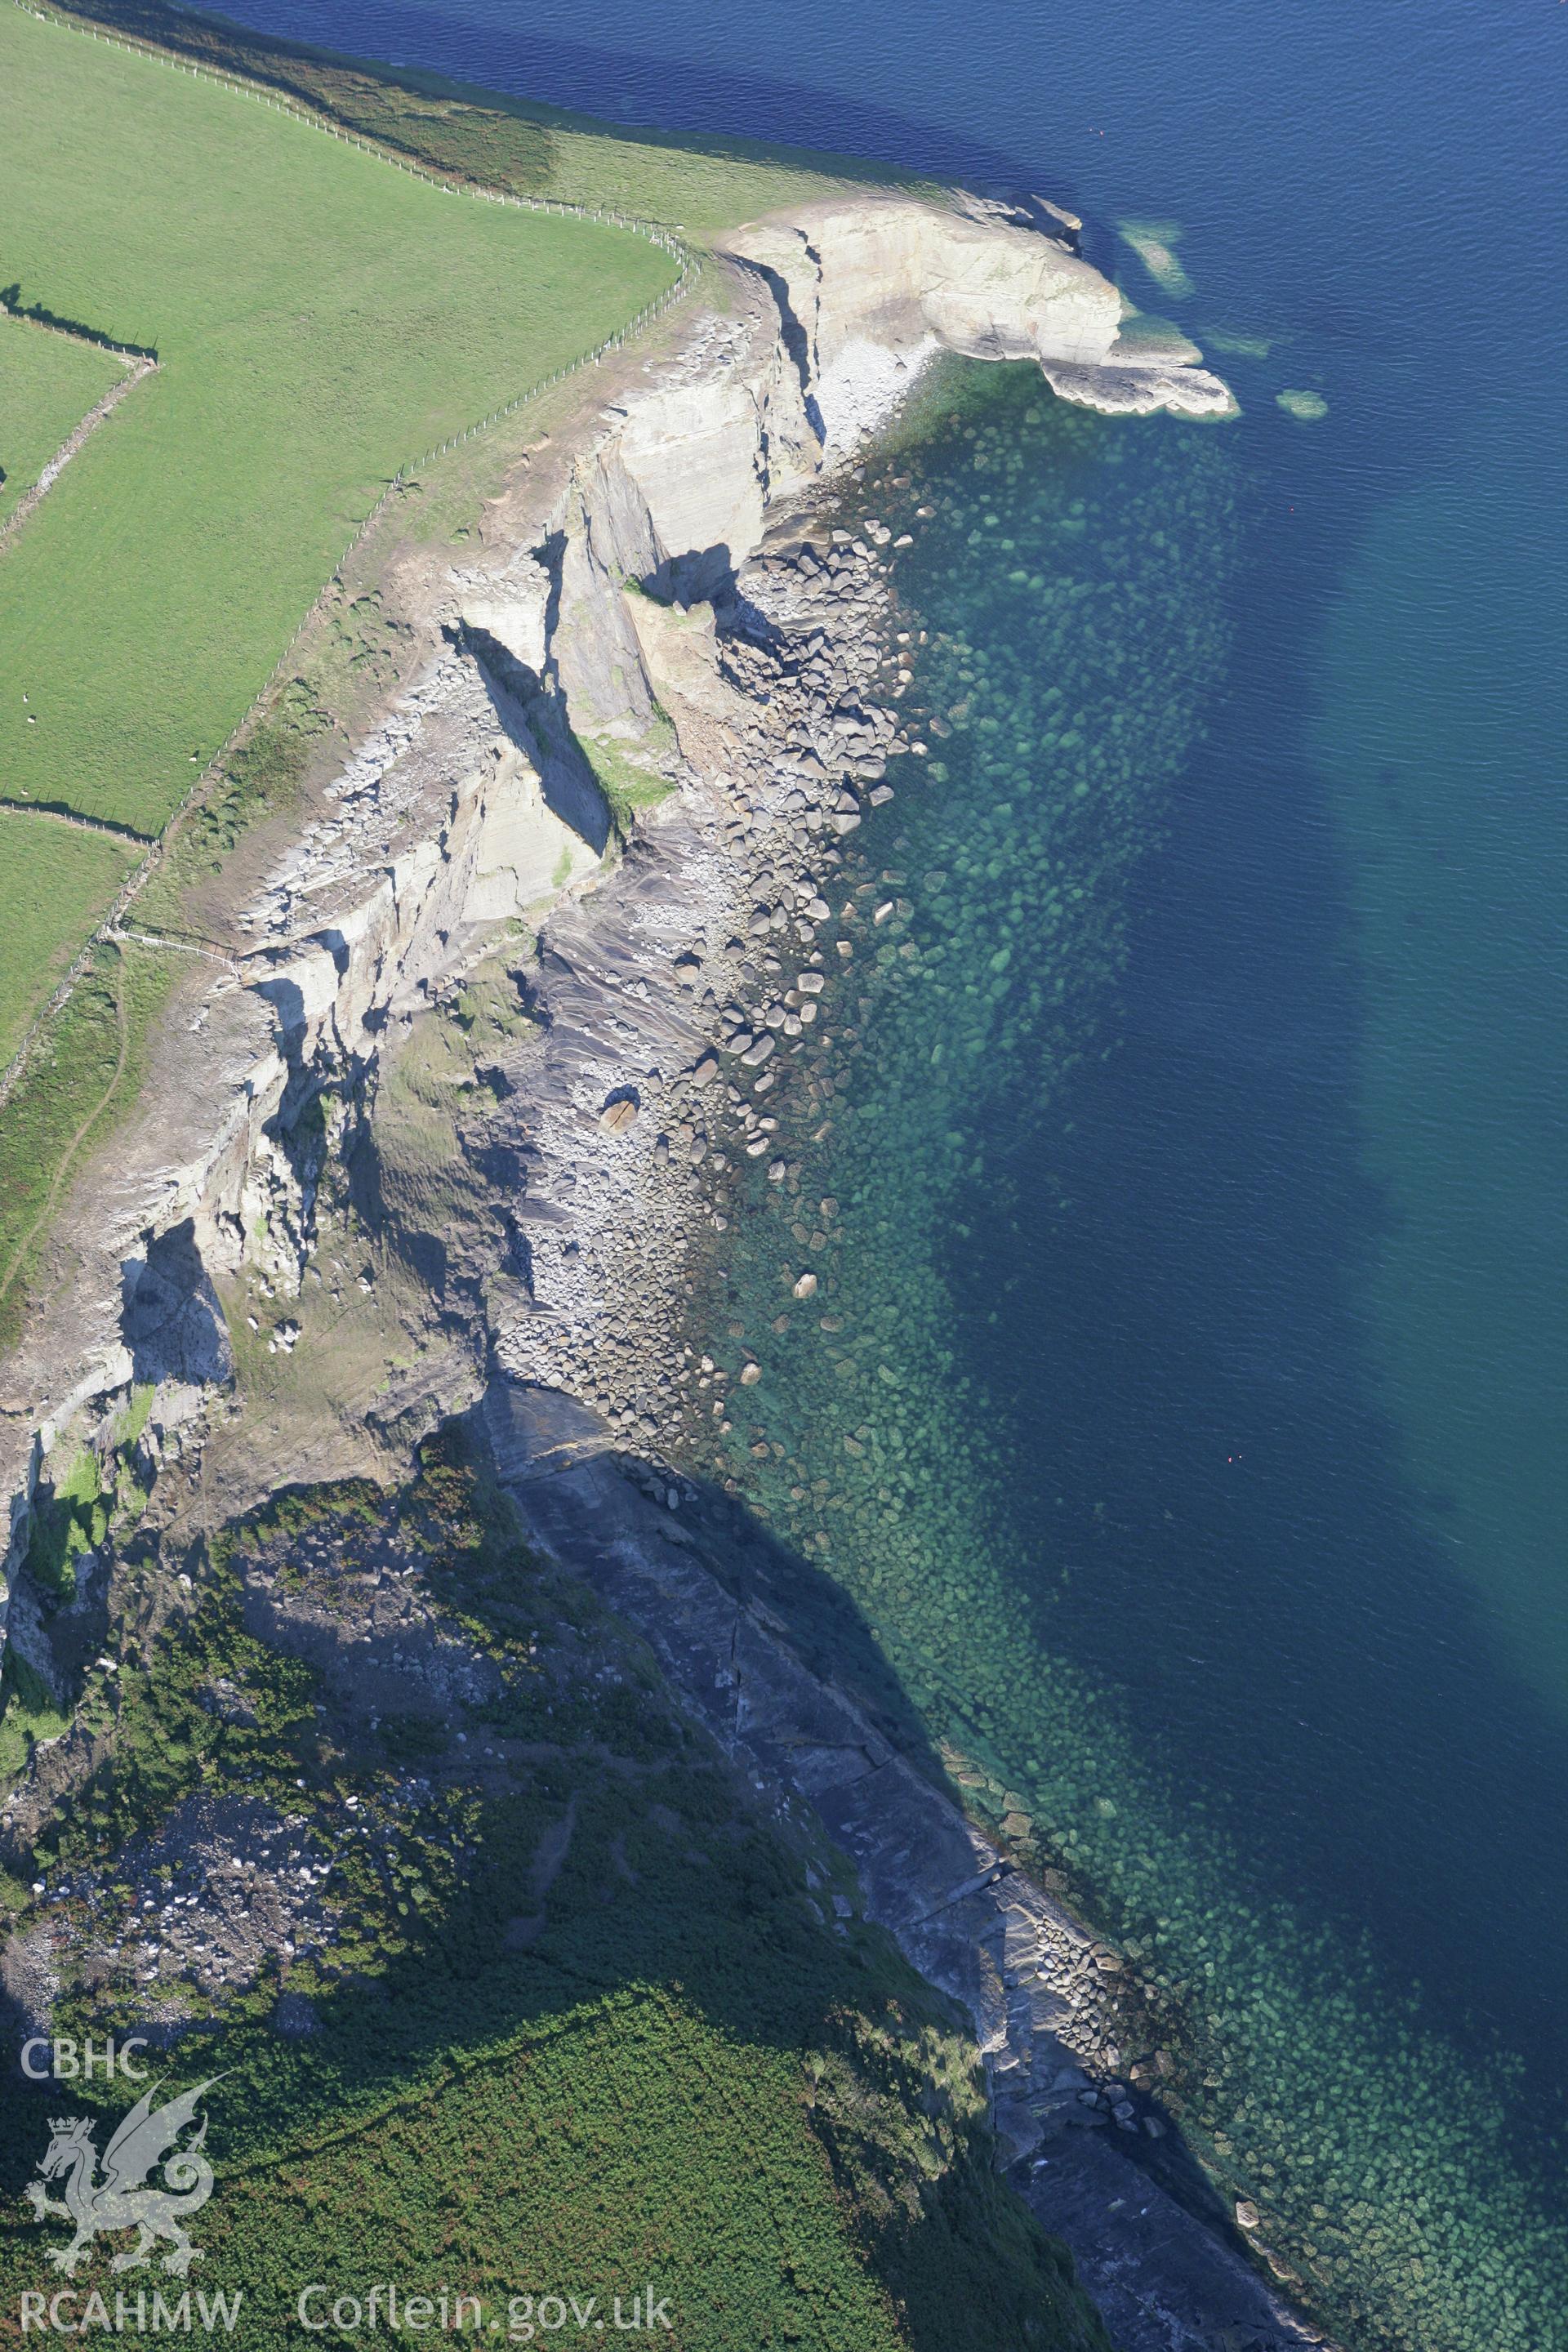 RCAHMW colour oblique aerial photograph of non-archaeological view of eroding cliff, Trwyn Llech y Doll, near Chambered Tomb Cilan Uchaf. Taken on 06 September 2007 by Toby Driver